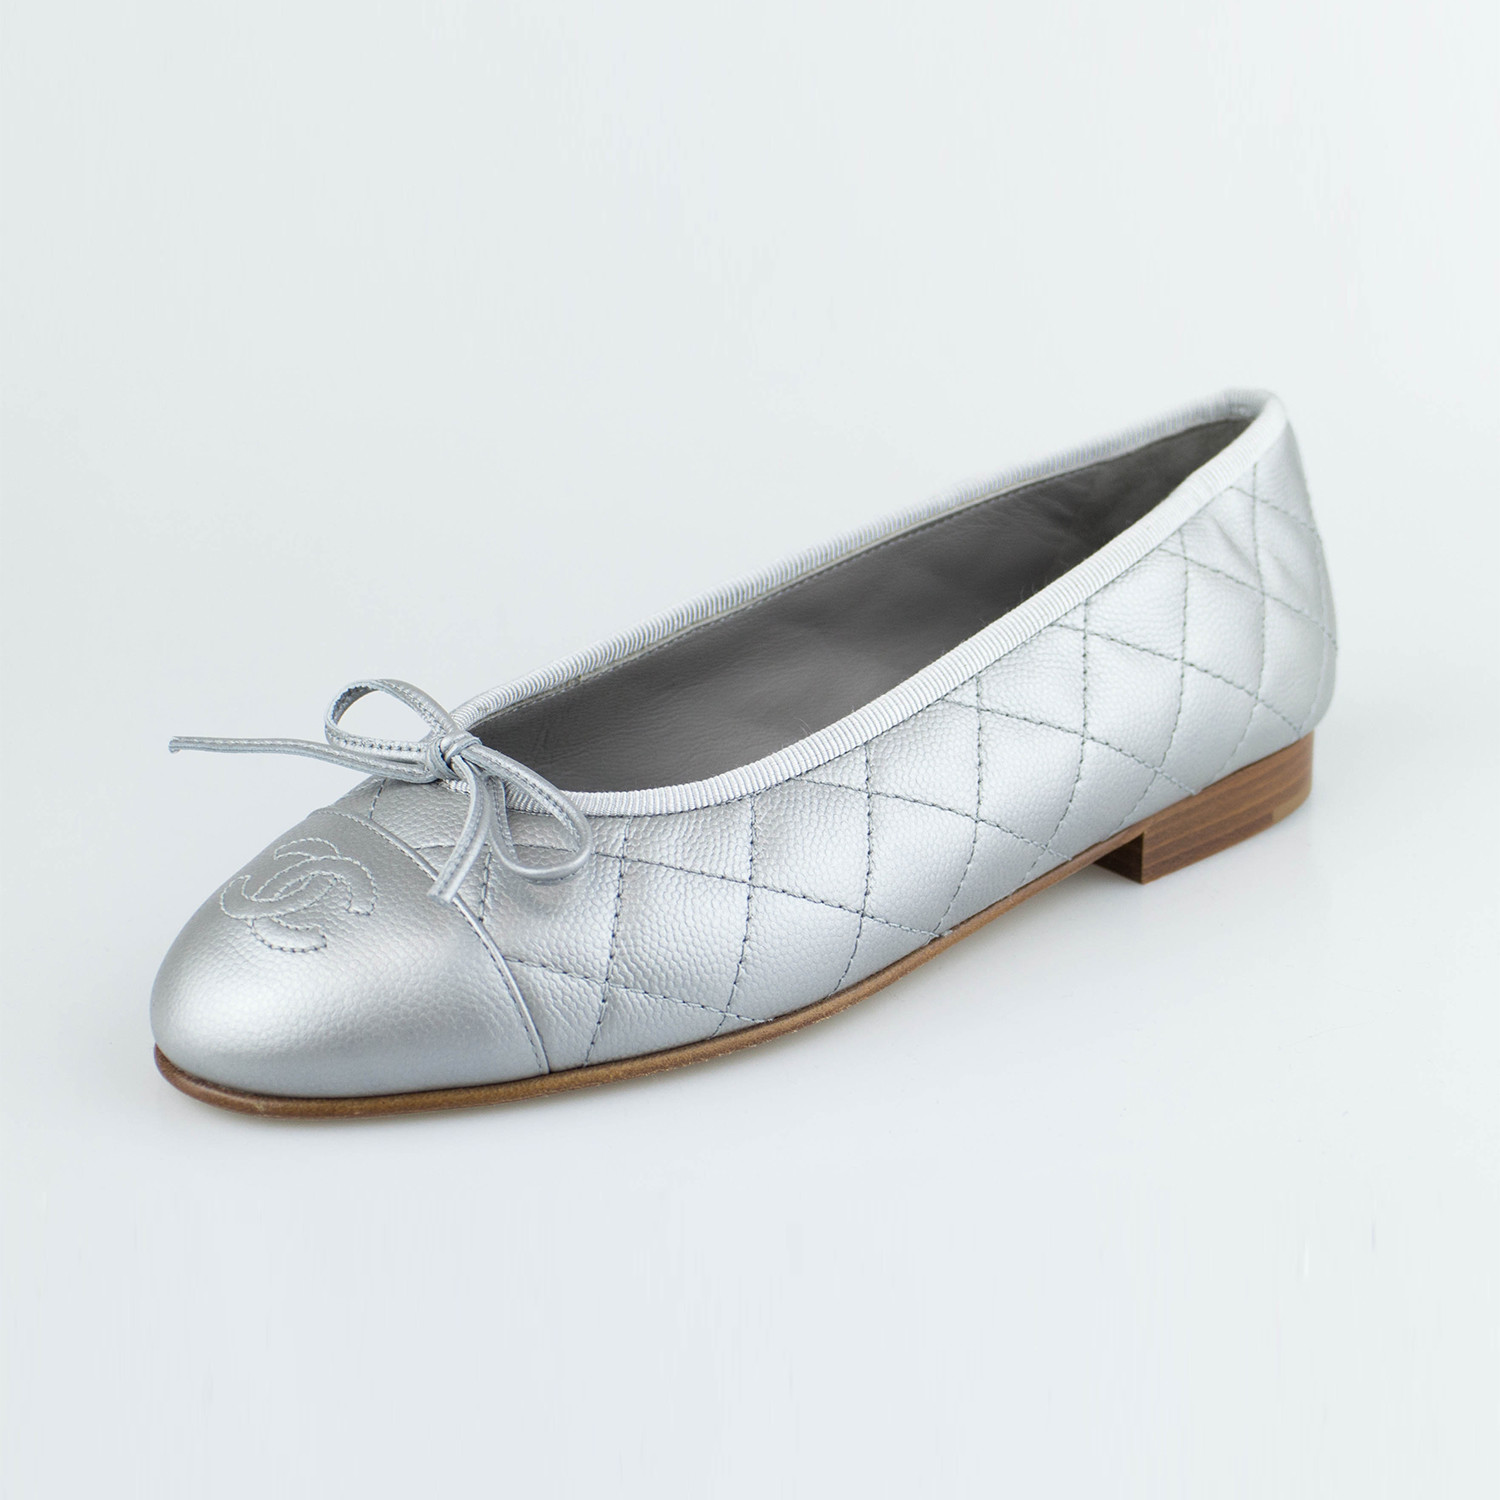 Chanel Quilted Ballet Flats - 5 For Sale on 1stDibs